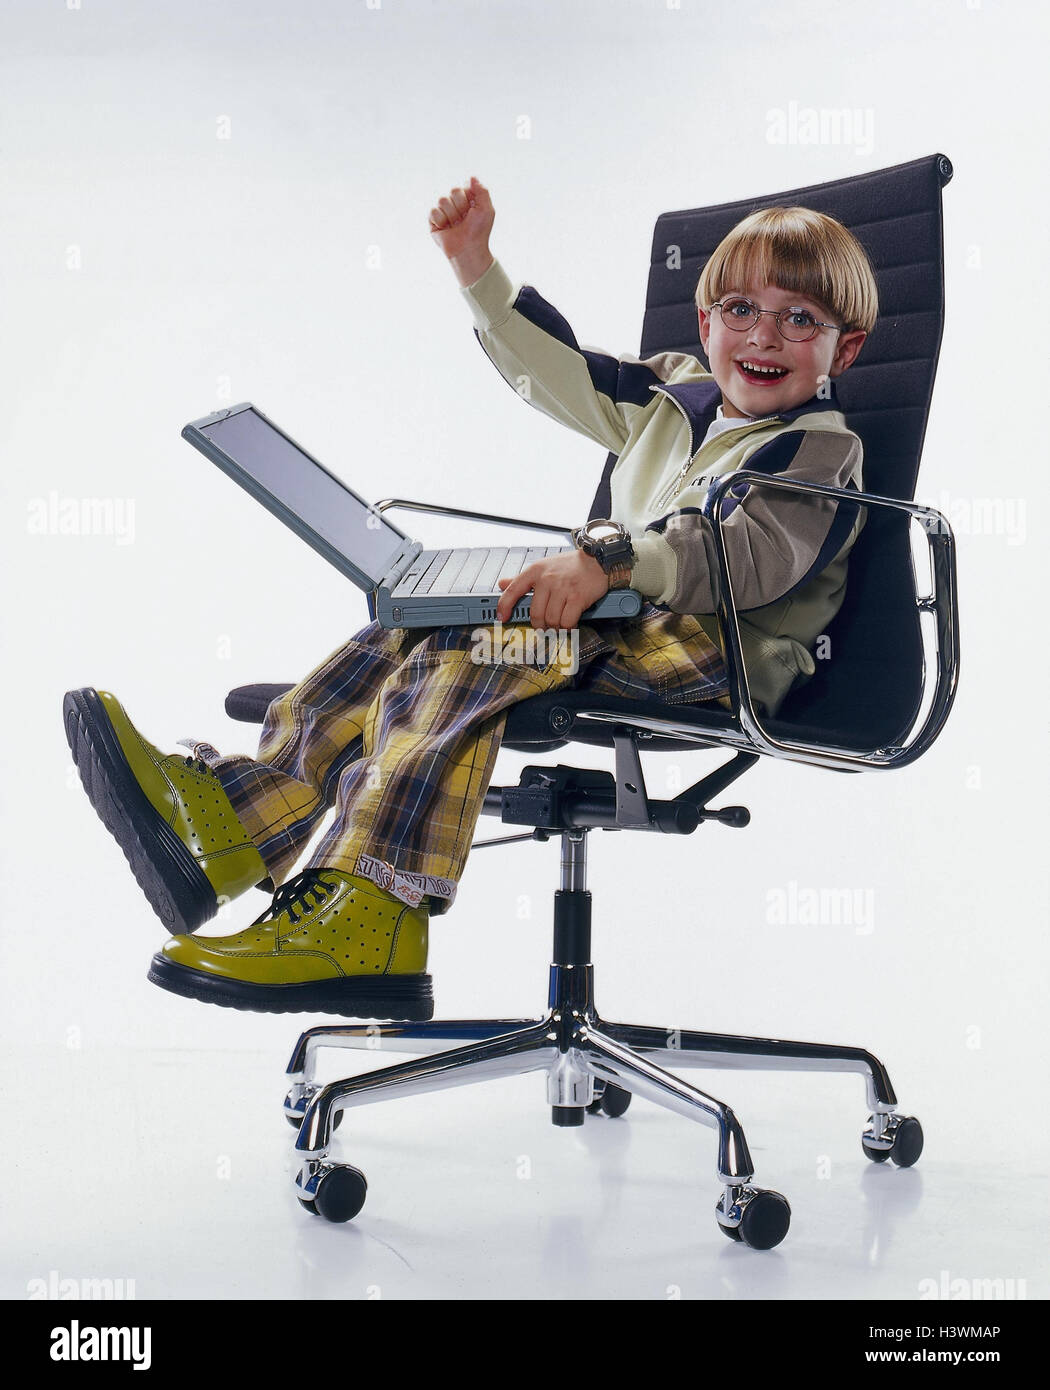 Boy, career plans, computer expert, programmers, office chair, sit, notebook computer, gesture, enthusiasm, professions, laptop, computer, joy, child as an adult, cut out, studio, childhood dream Stock Photo